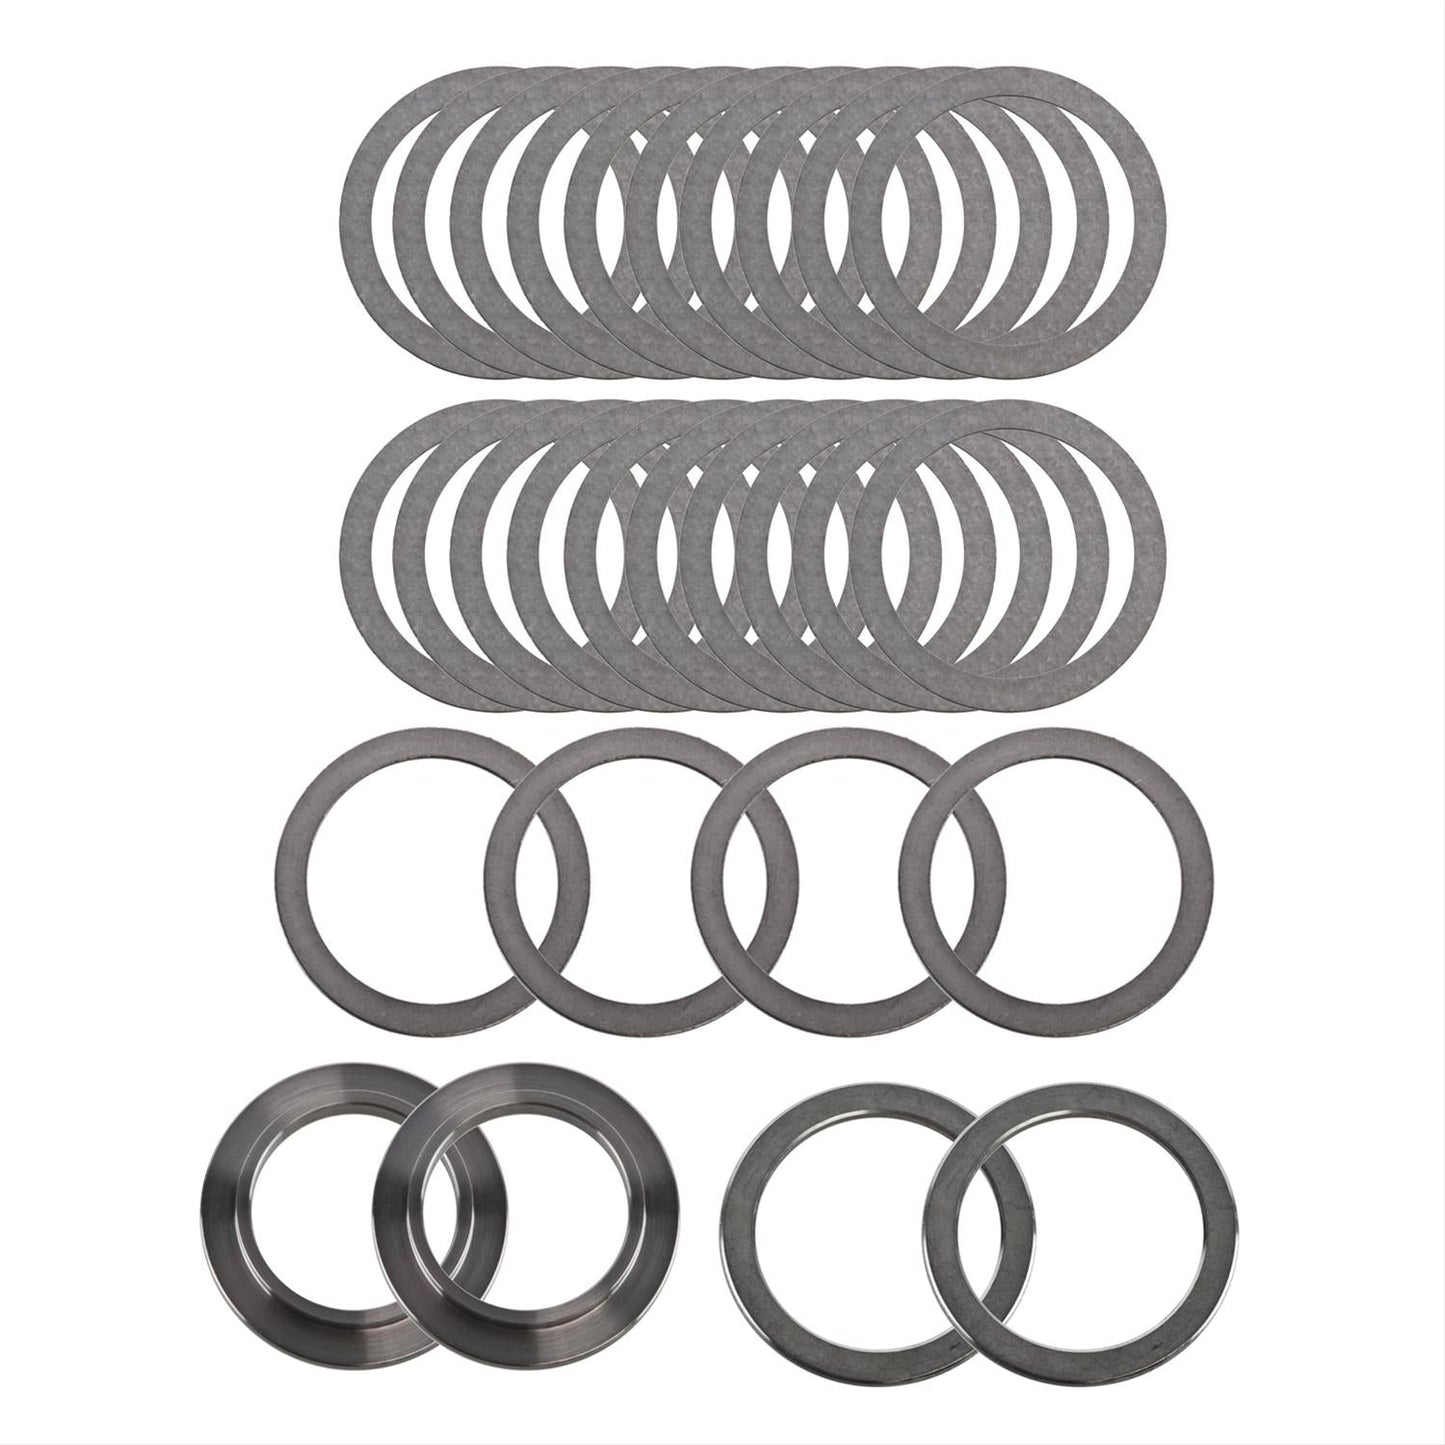 Differential Carrier Bearing Shim Pack, Dana 44 and Dana 53, 1950-1986, Willys & Jeep - The JeepsterMan